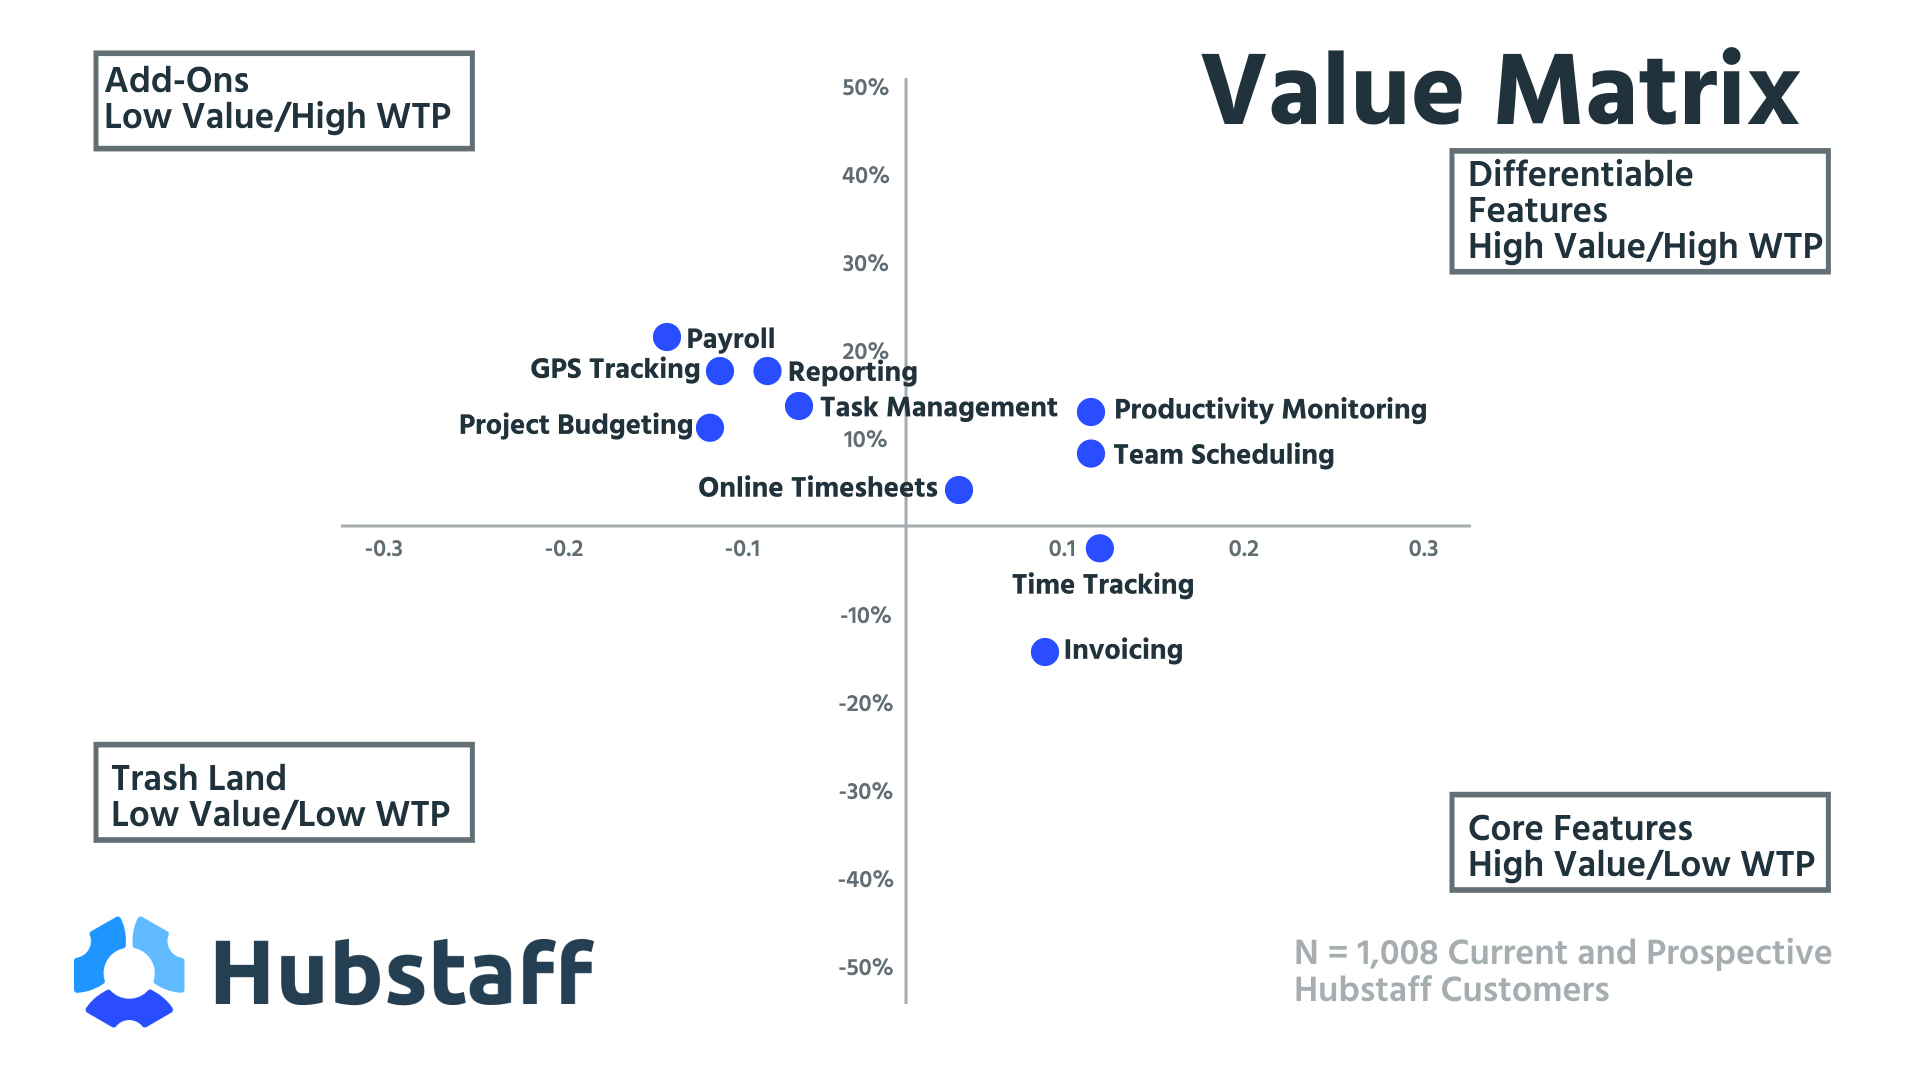 Value matrix plots features by value and willingness to pay